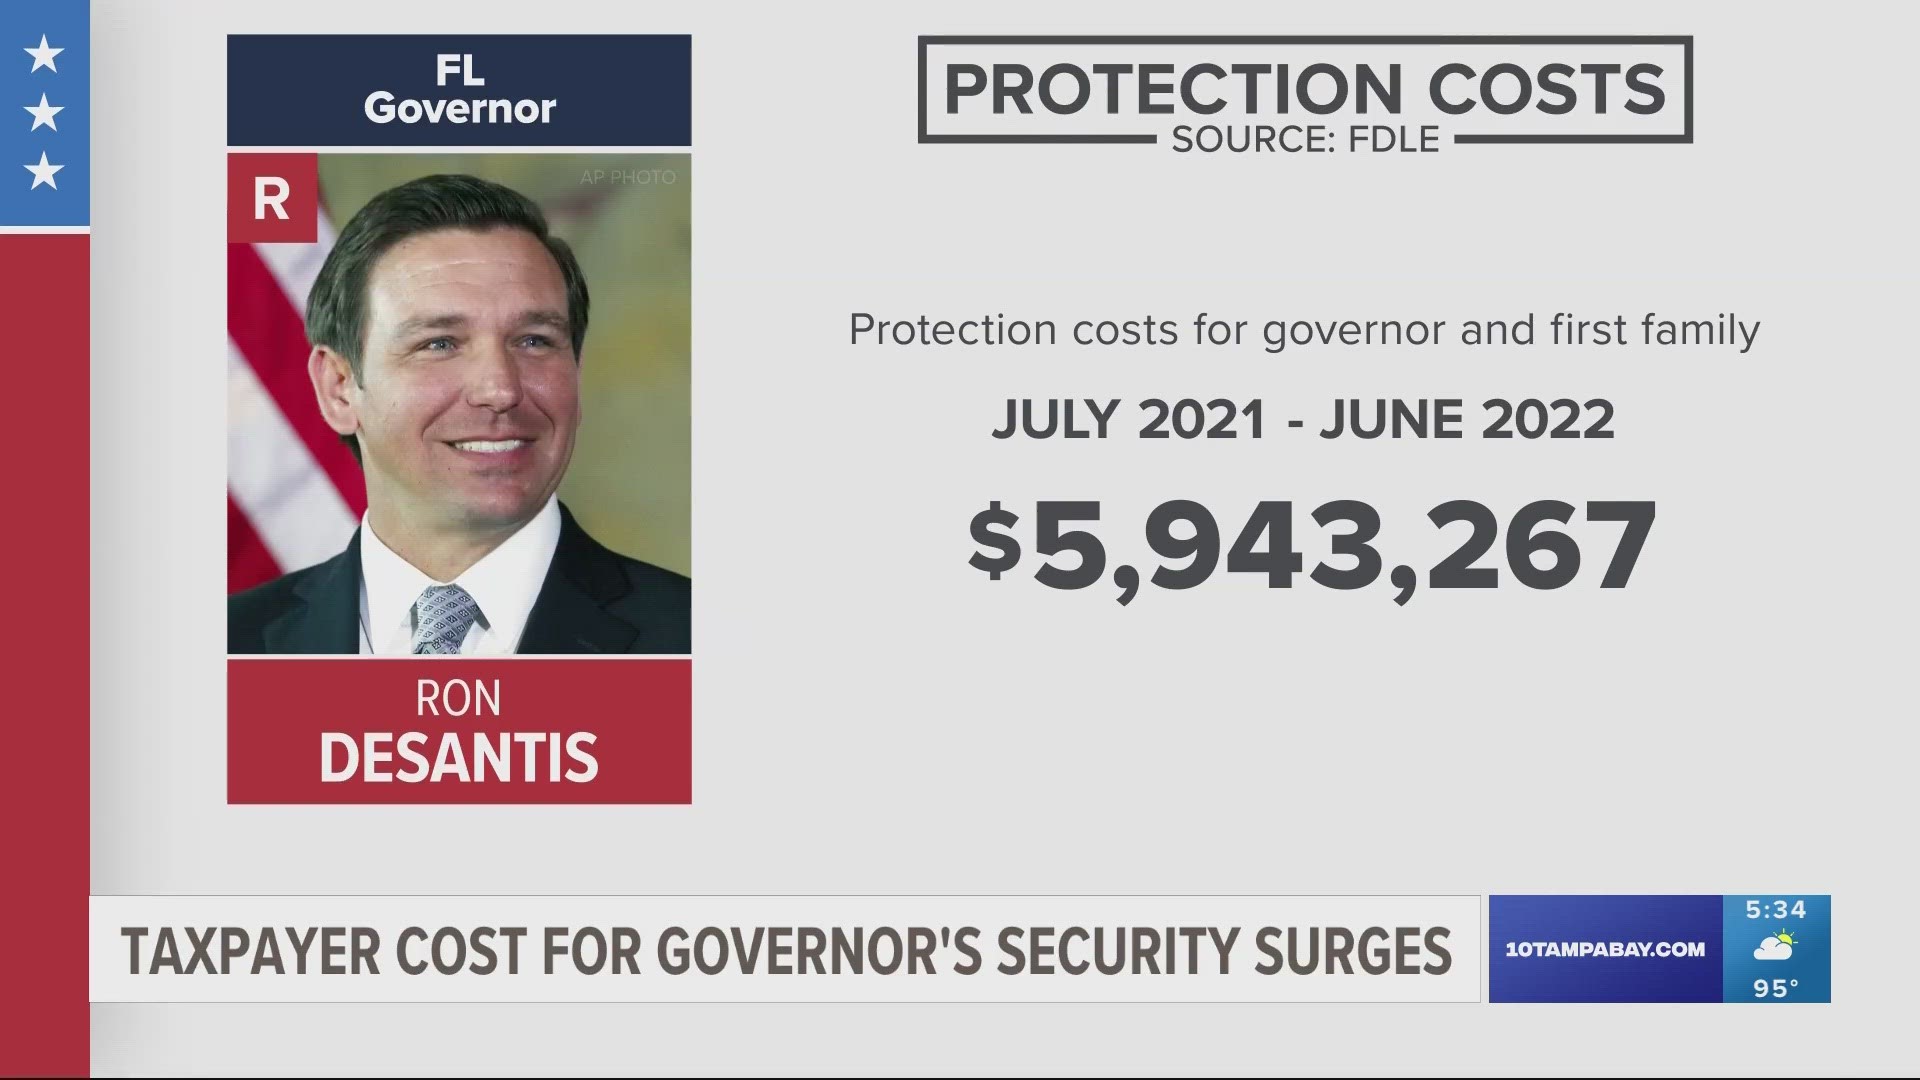 We follow the money as the costs of protecting Governor Ron DeSantis rises.